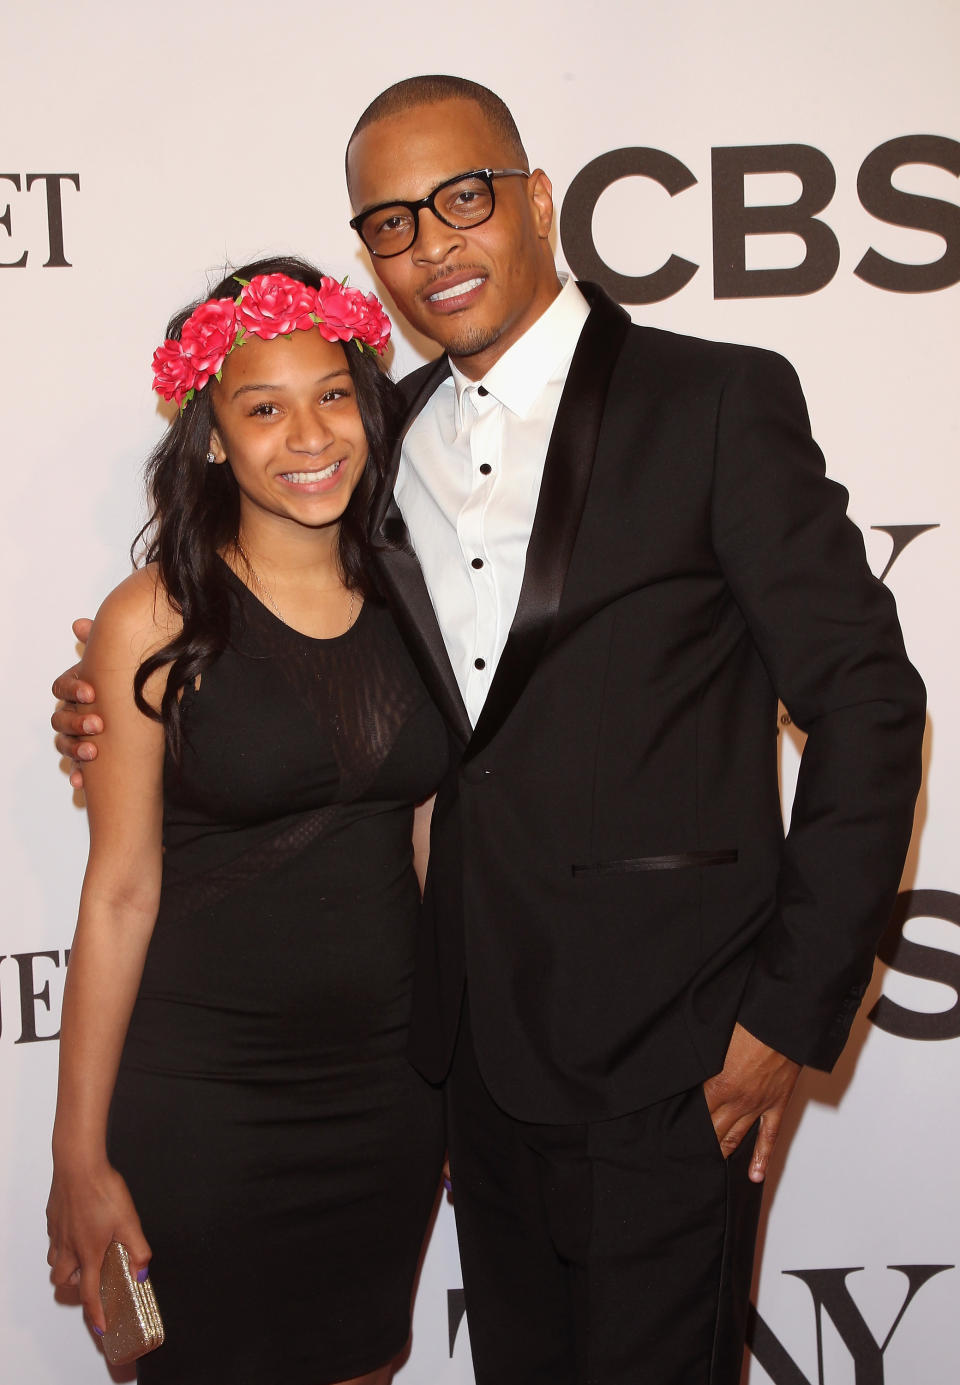 NEW YORK, NY - JUNE 08:  Deyjah Imani Harris (L) and T.I. attend American Theatre Wing's 68th Annual Tony Awards at Radio City Music Hall on June 8, 2014 in New York City.  (Photo by Jim Spellman/WireImage)